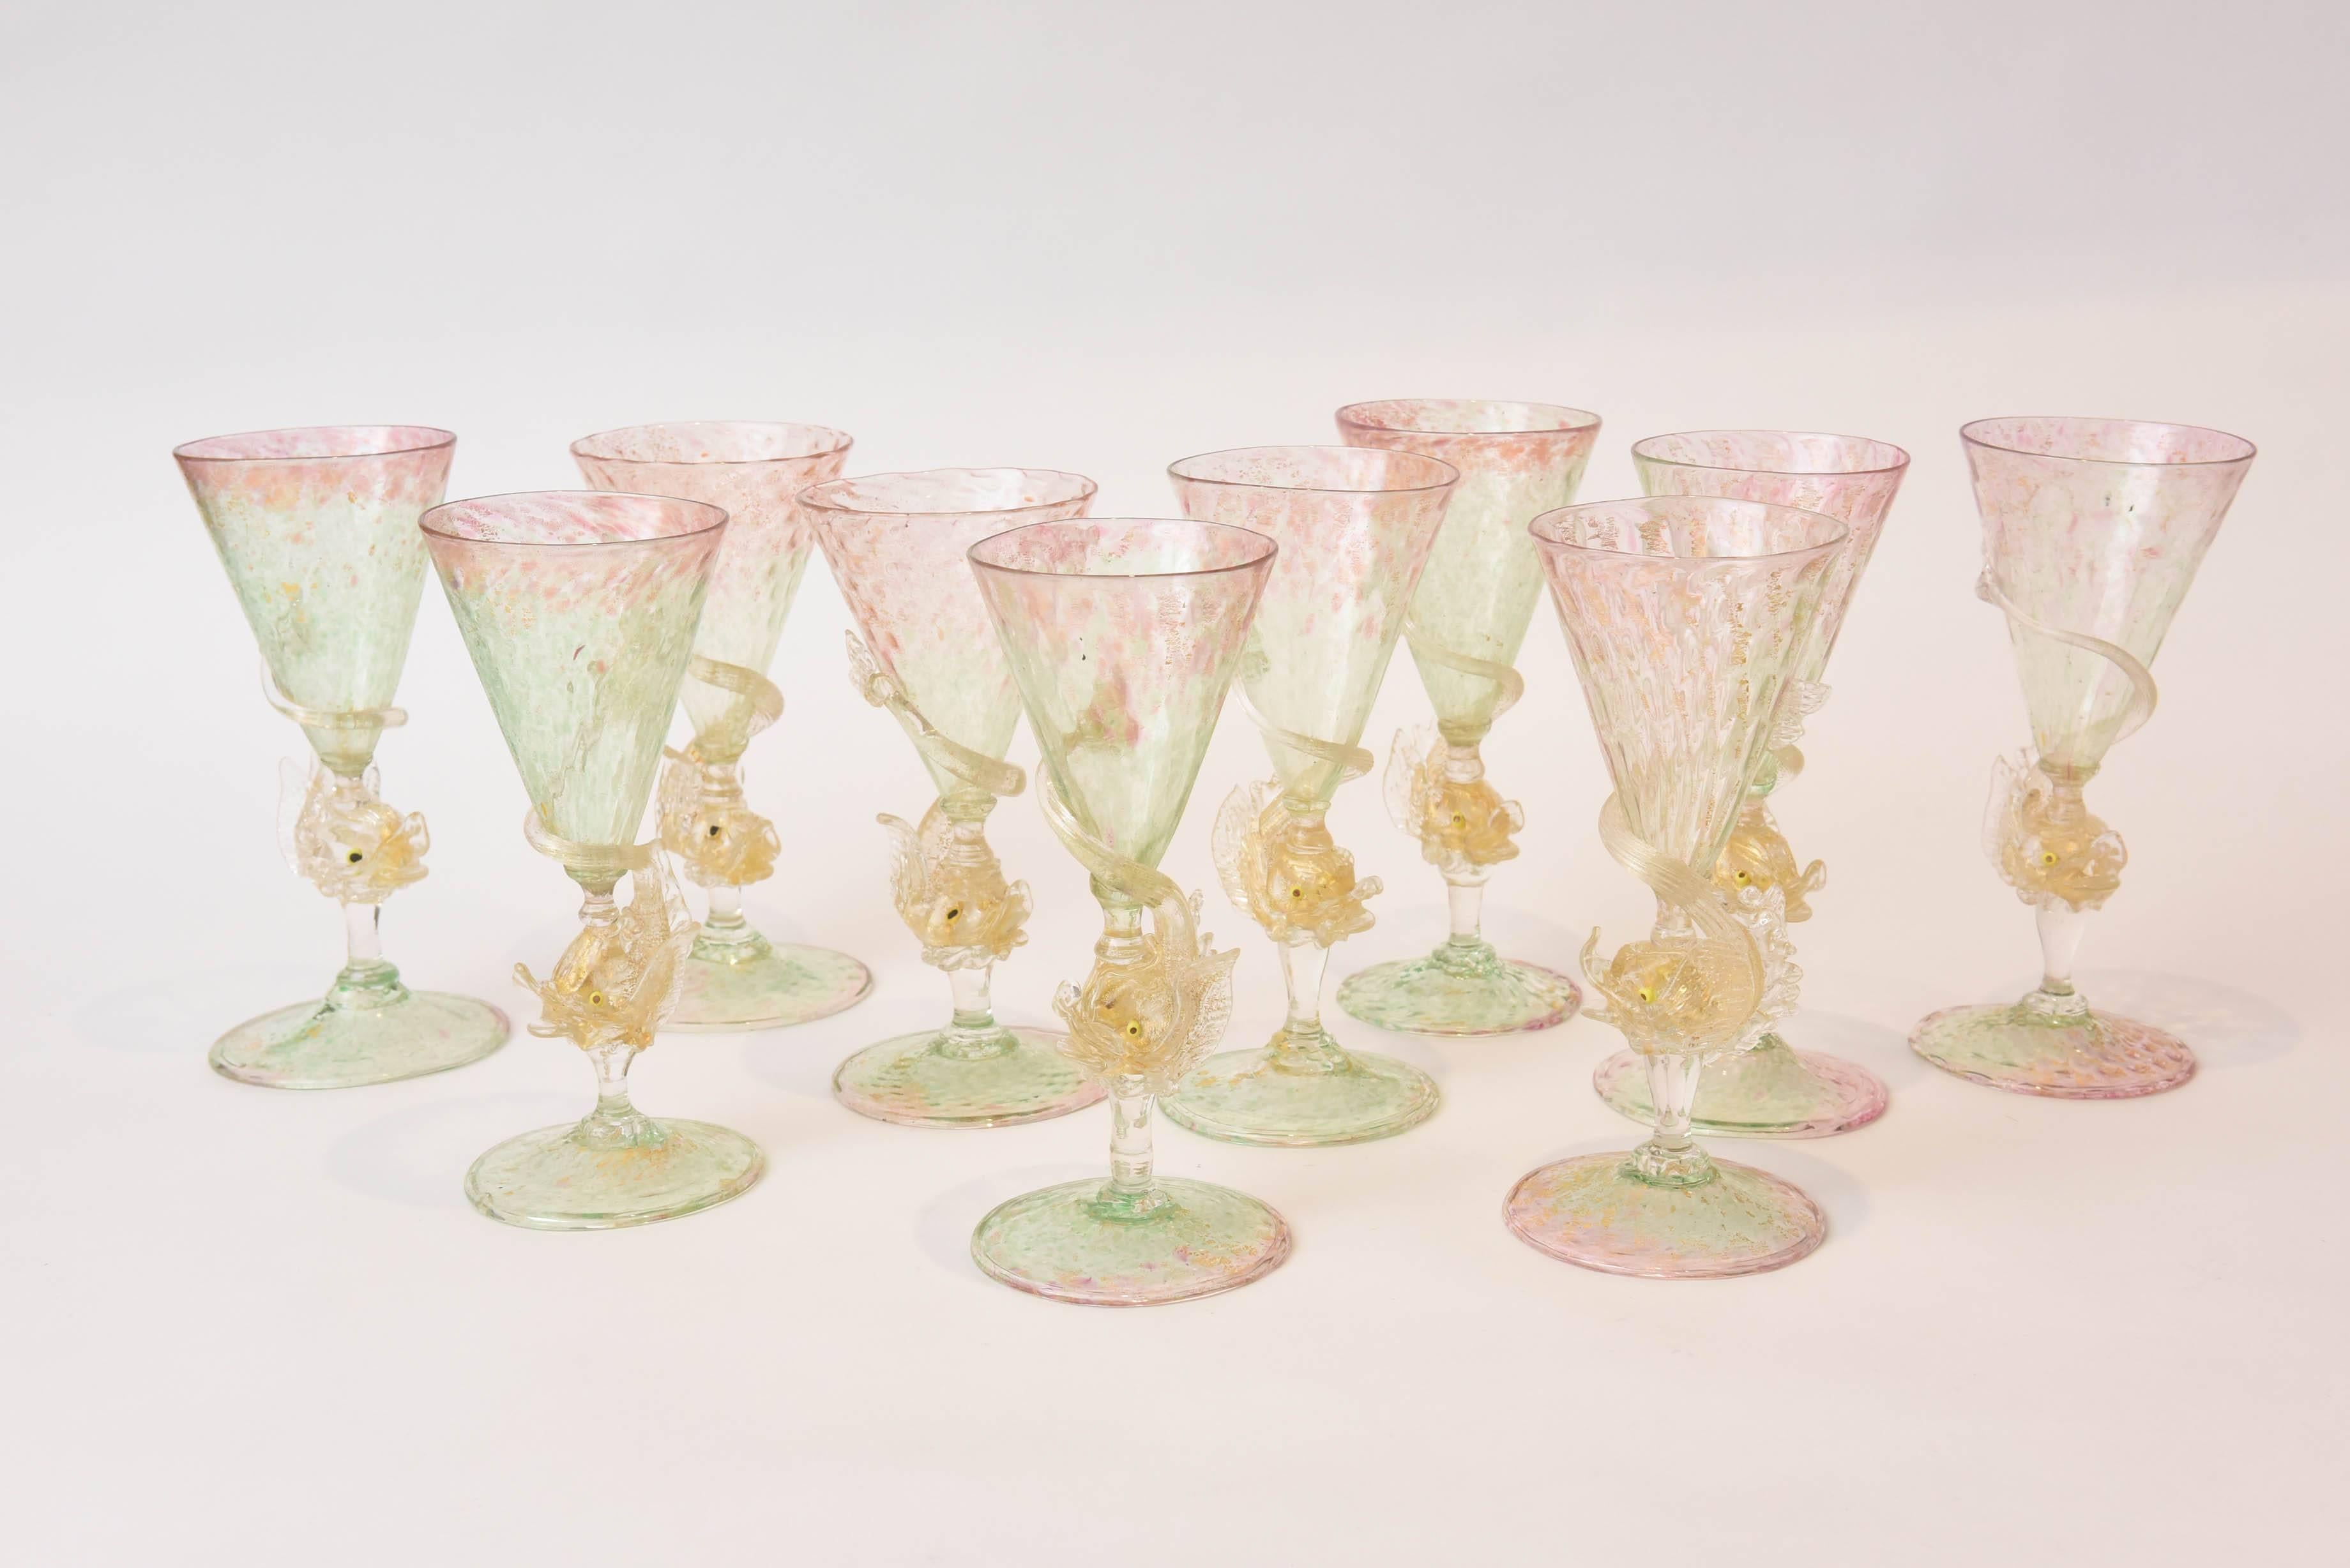 Antique goblets all individually mouth blown featuring a double color of pale and pretty pink and green. The dolphin base with its tail fully circling playfully around each stem and highlighted with all-over 24-karat blown gold inclusion. From one